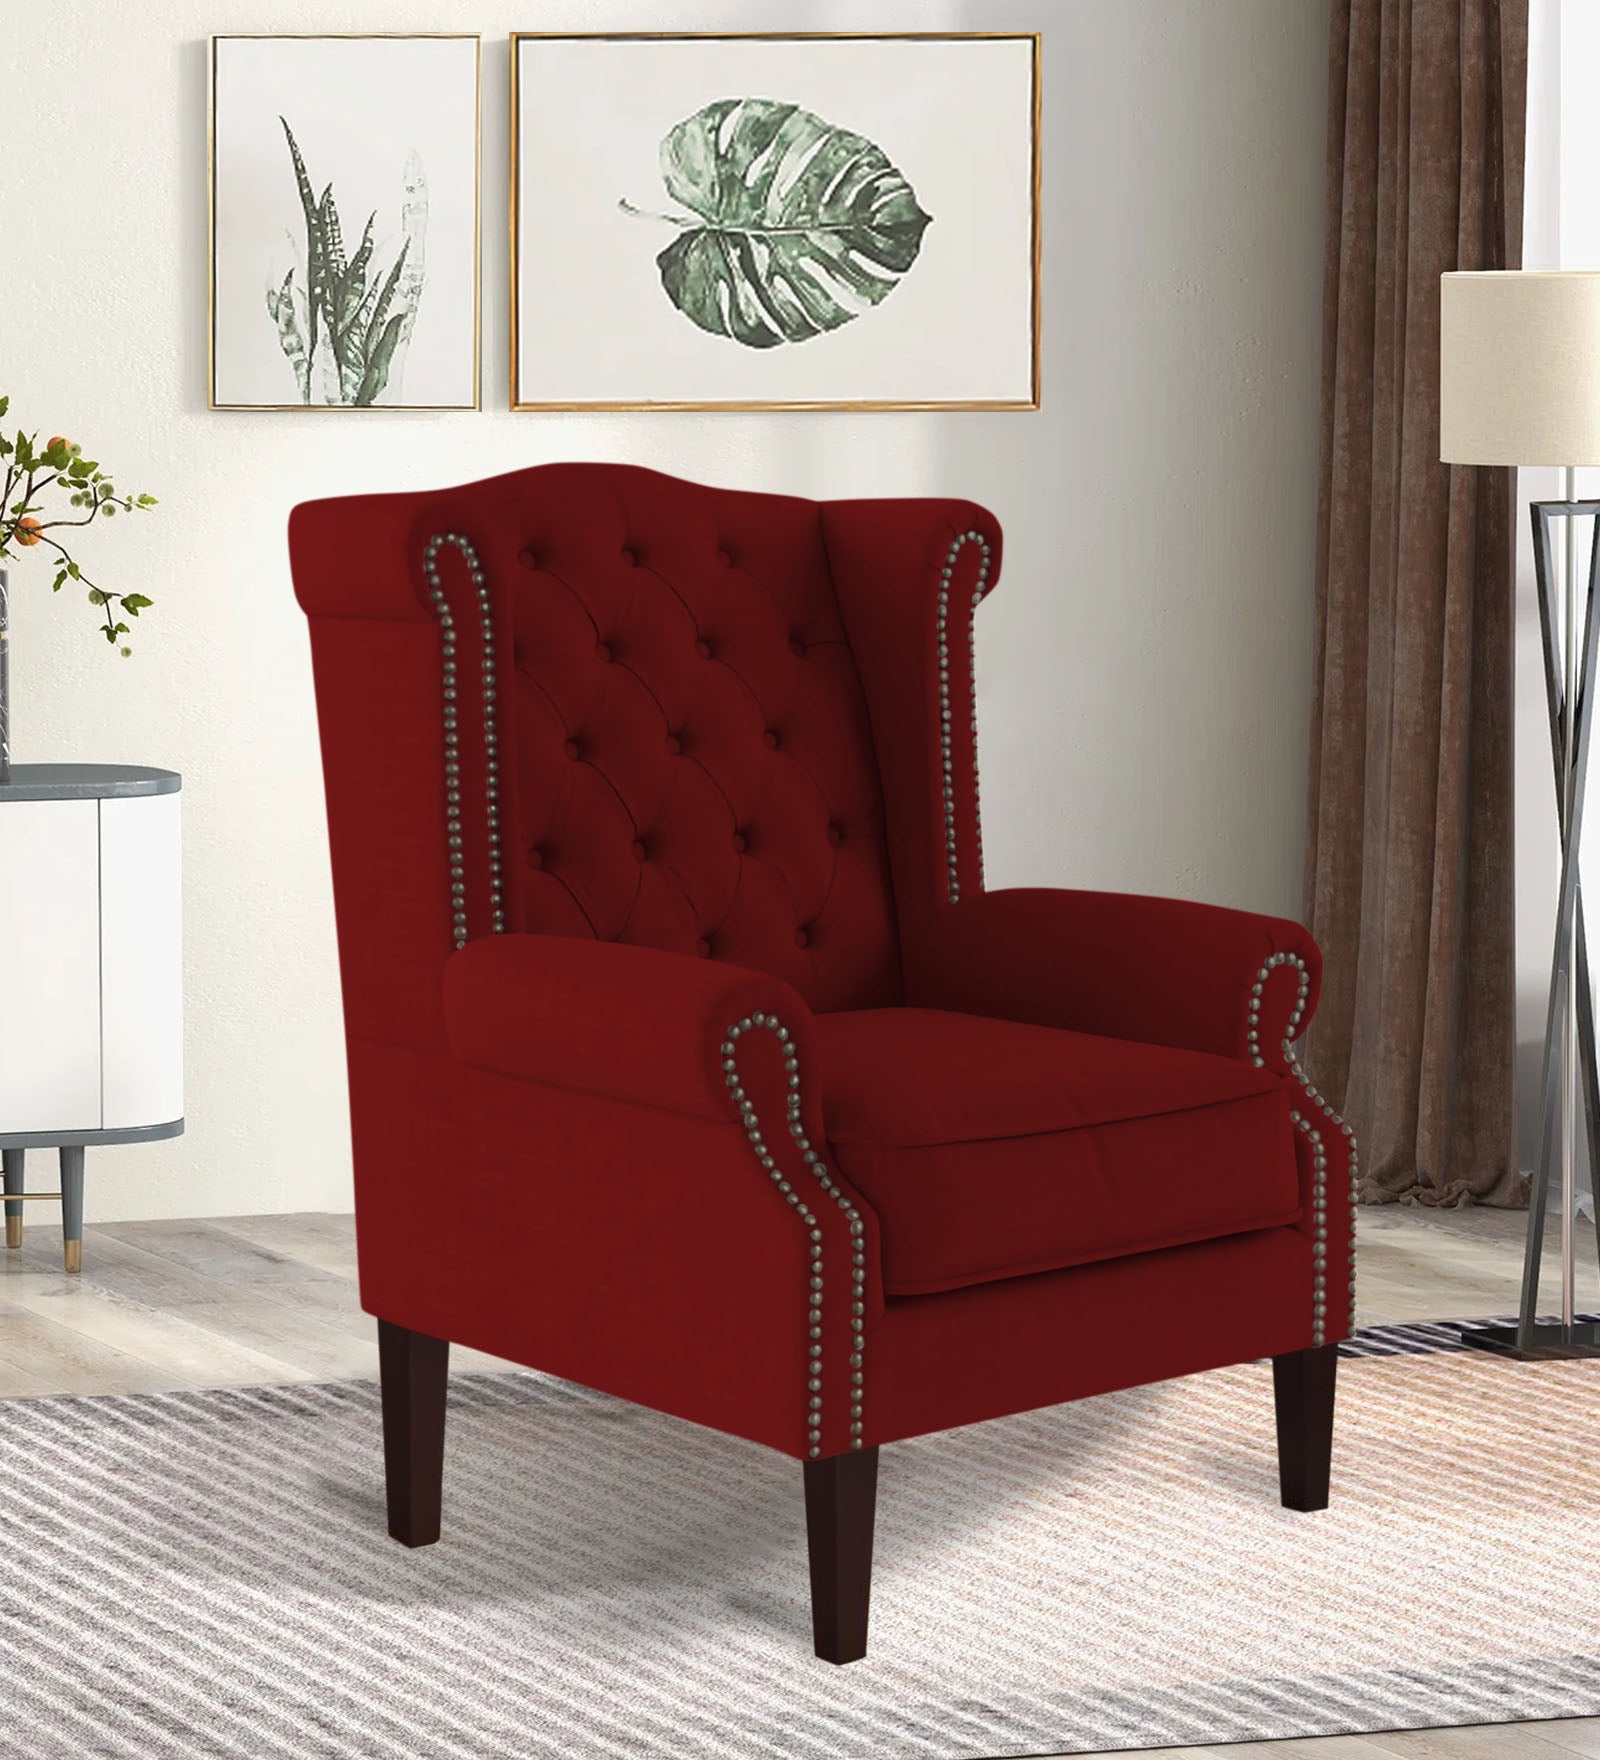 Nottage Fabric Wing Chair in Blood Maroon Colour